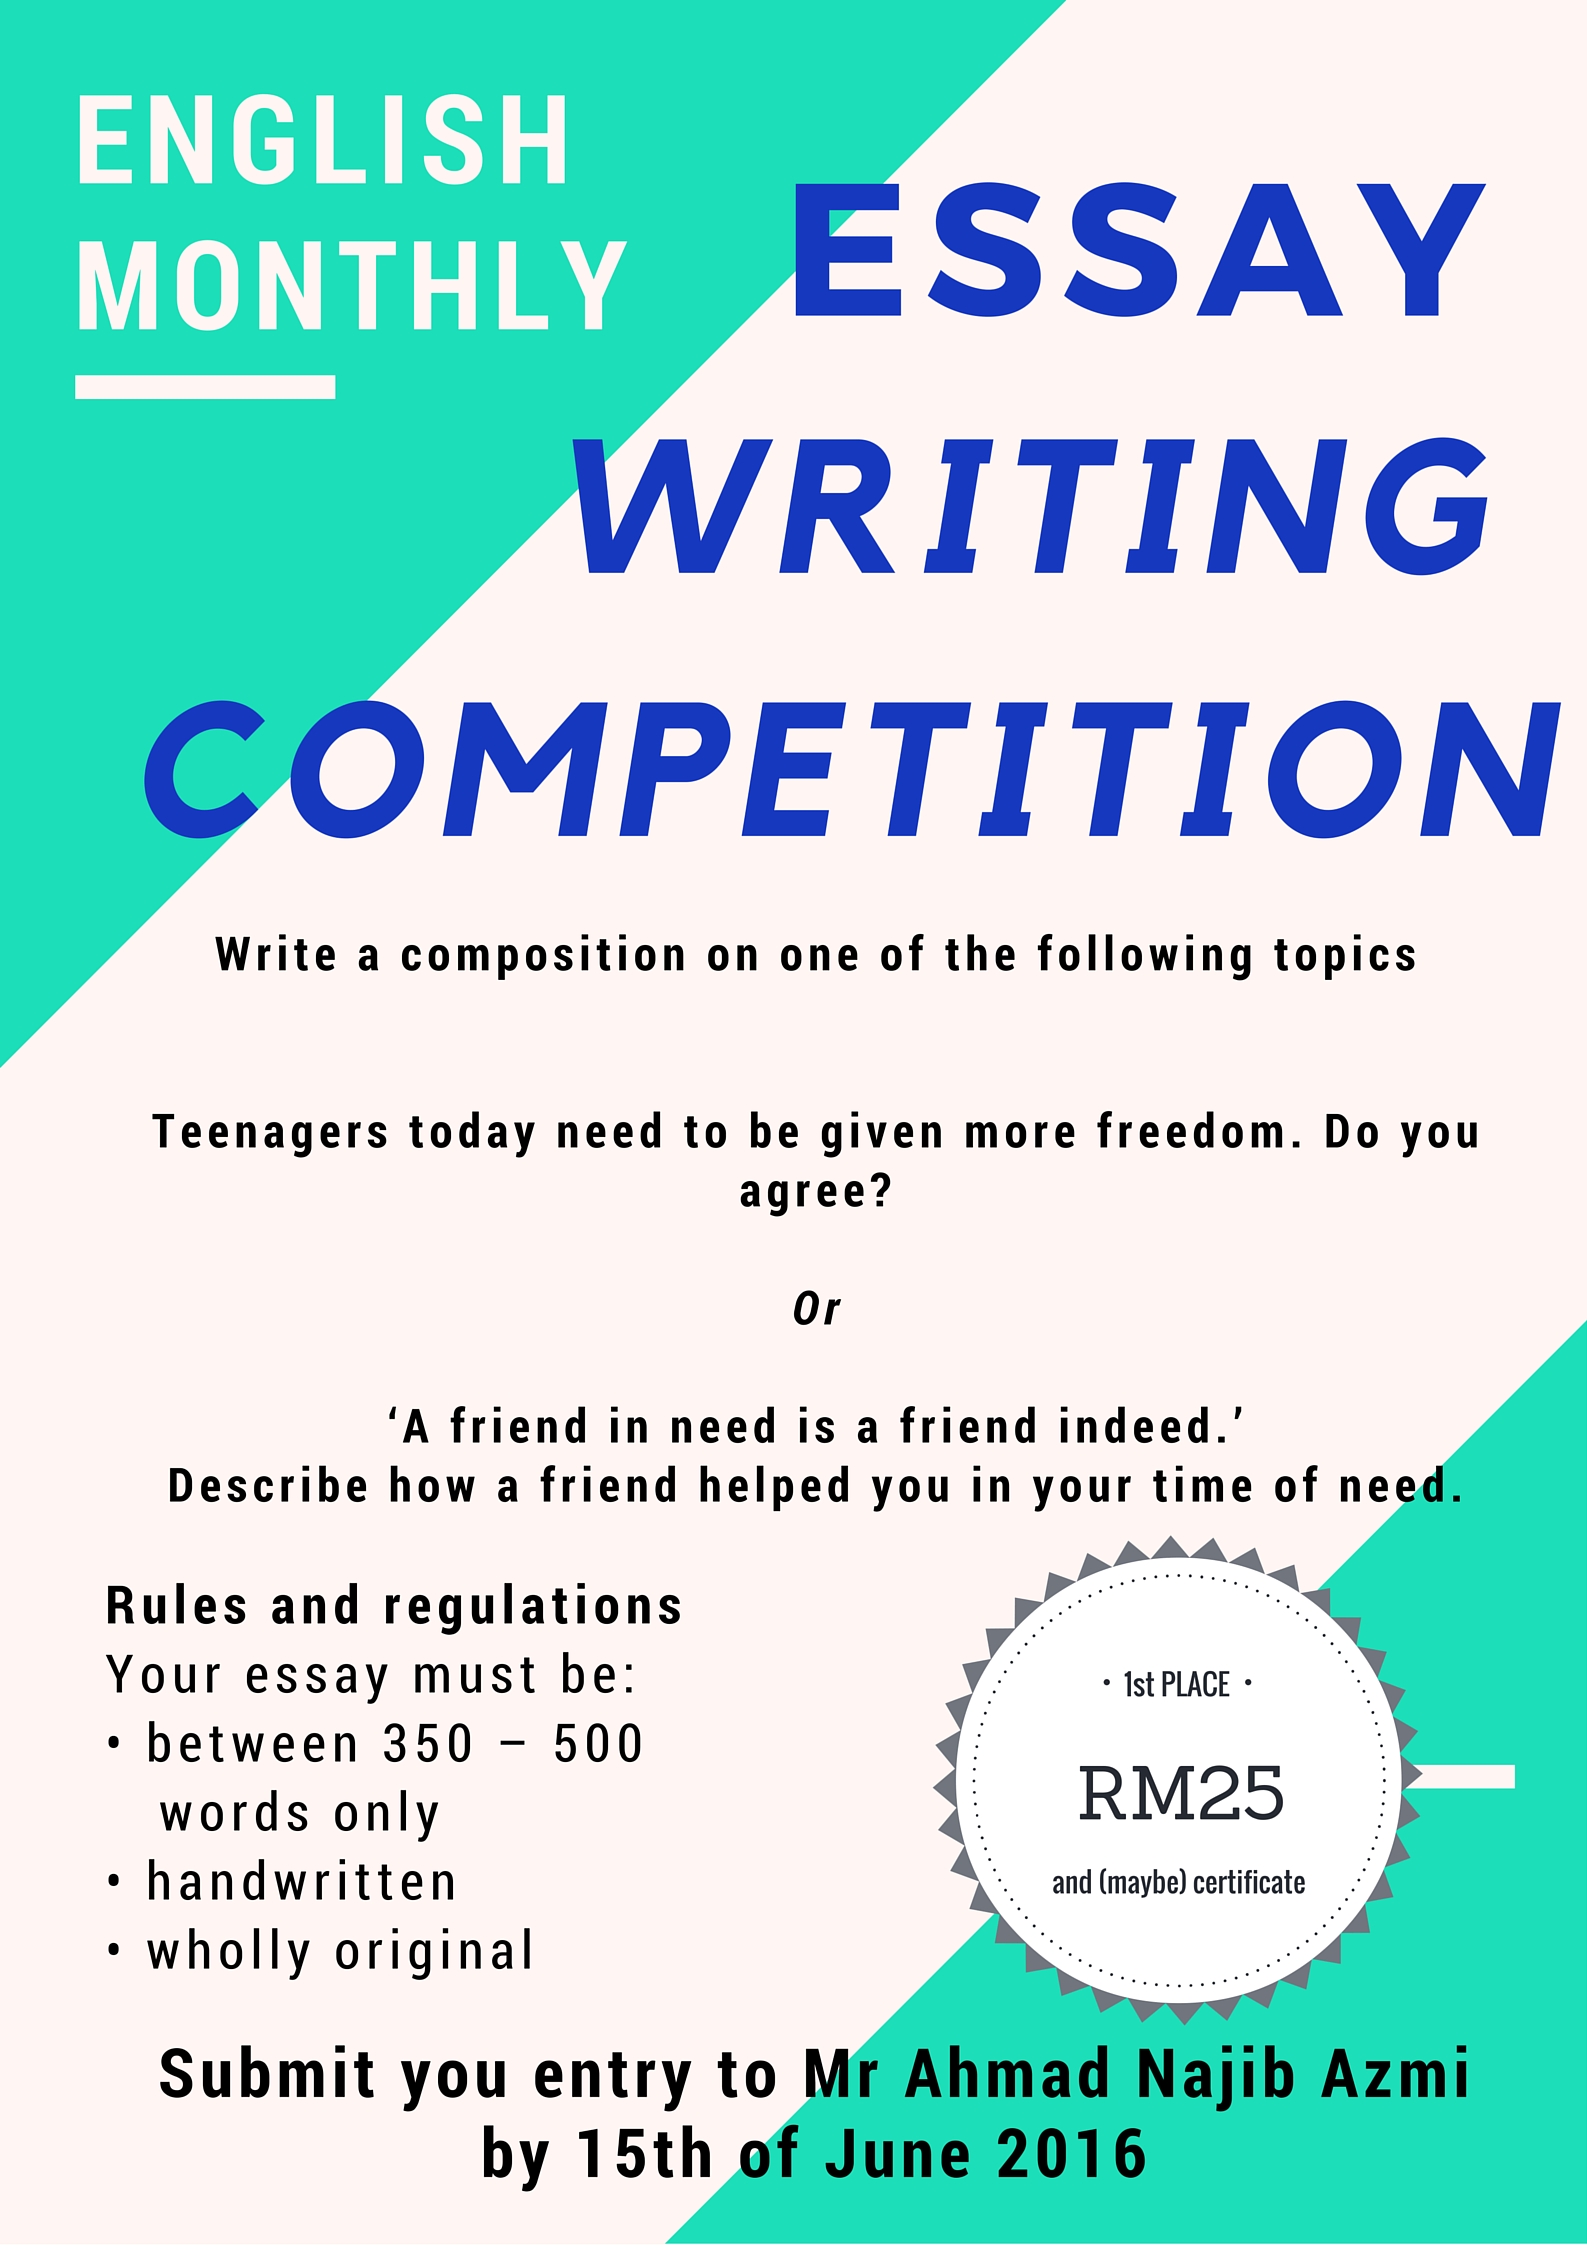 how to write essay in english for competition